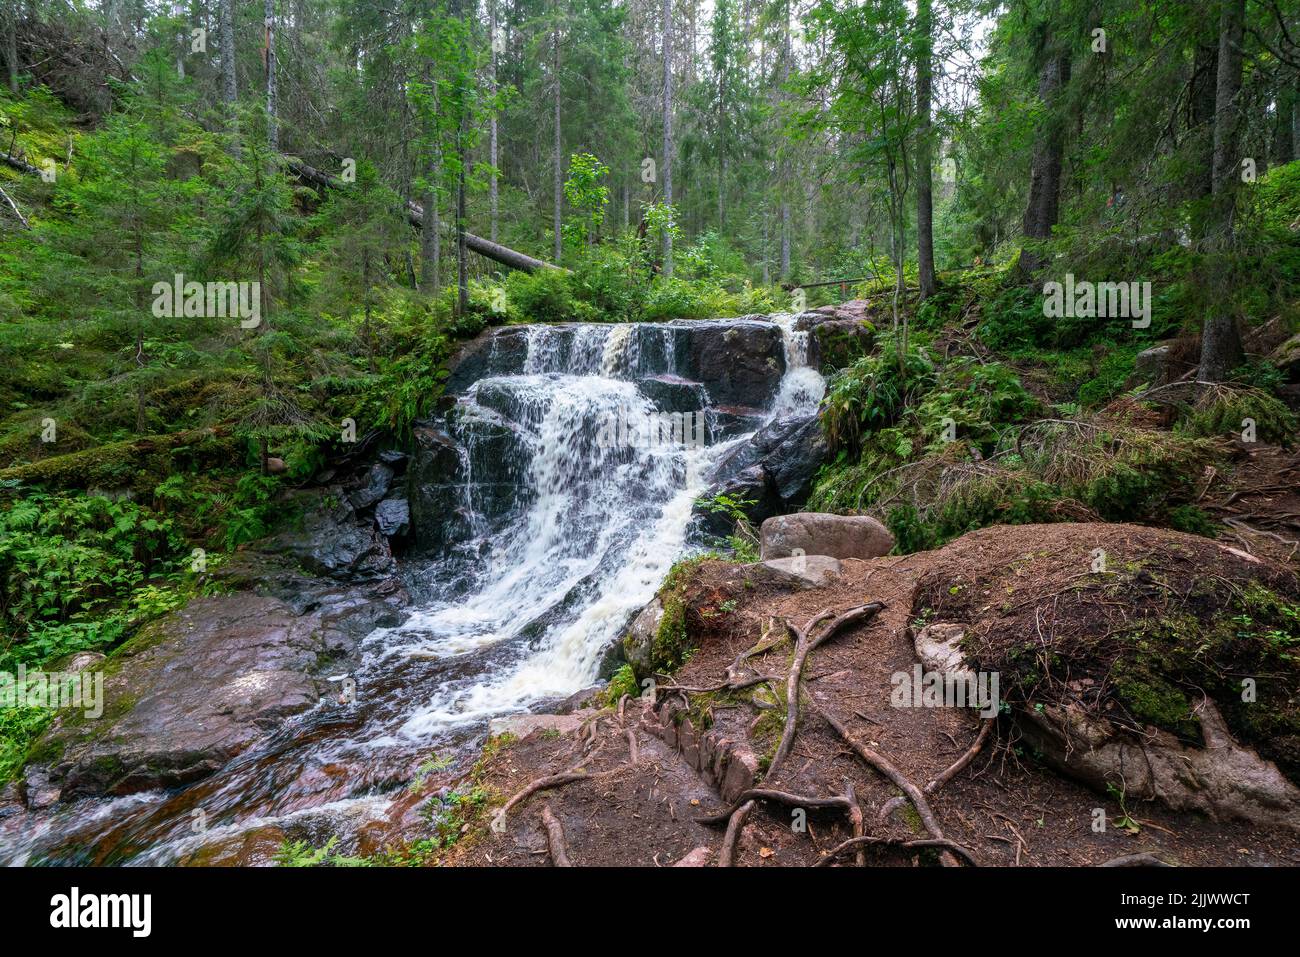 Small waterfall in the forest of Skuleskogen National Park, Sweden. River flowing through the forest. Hiking High Coast trail. Stock Photo